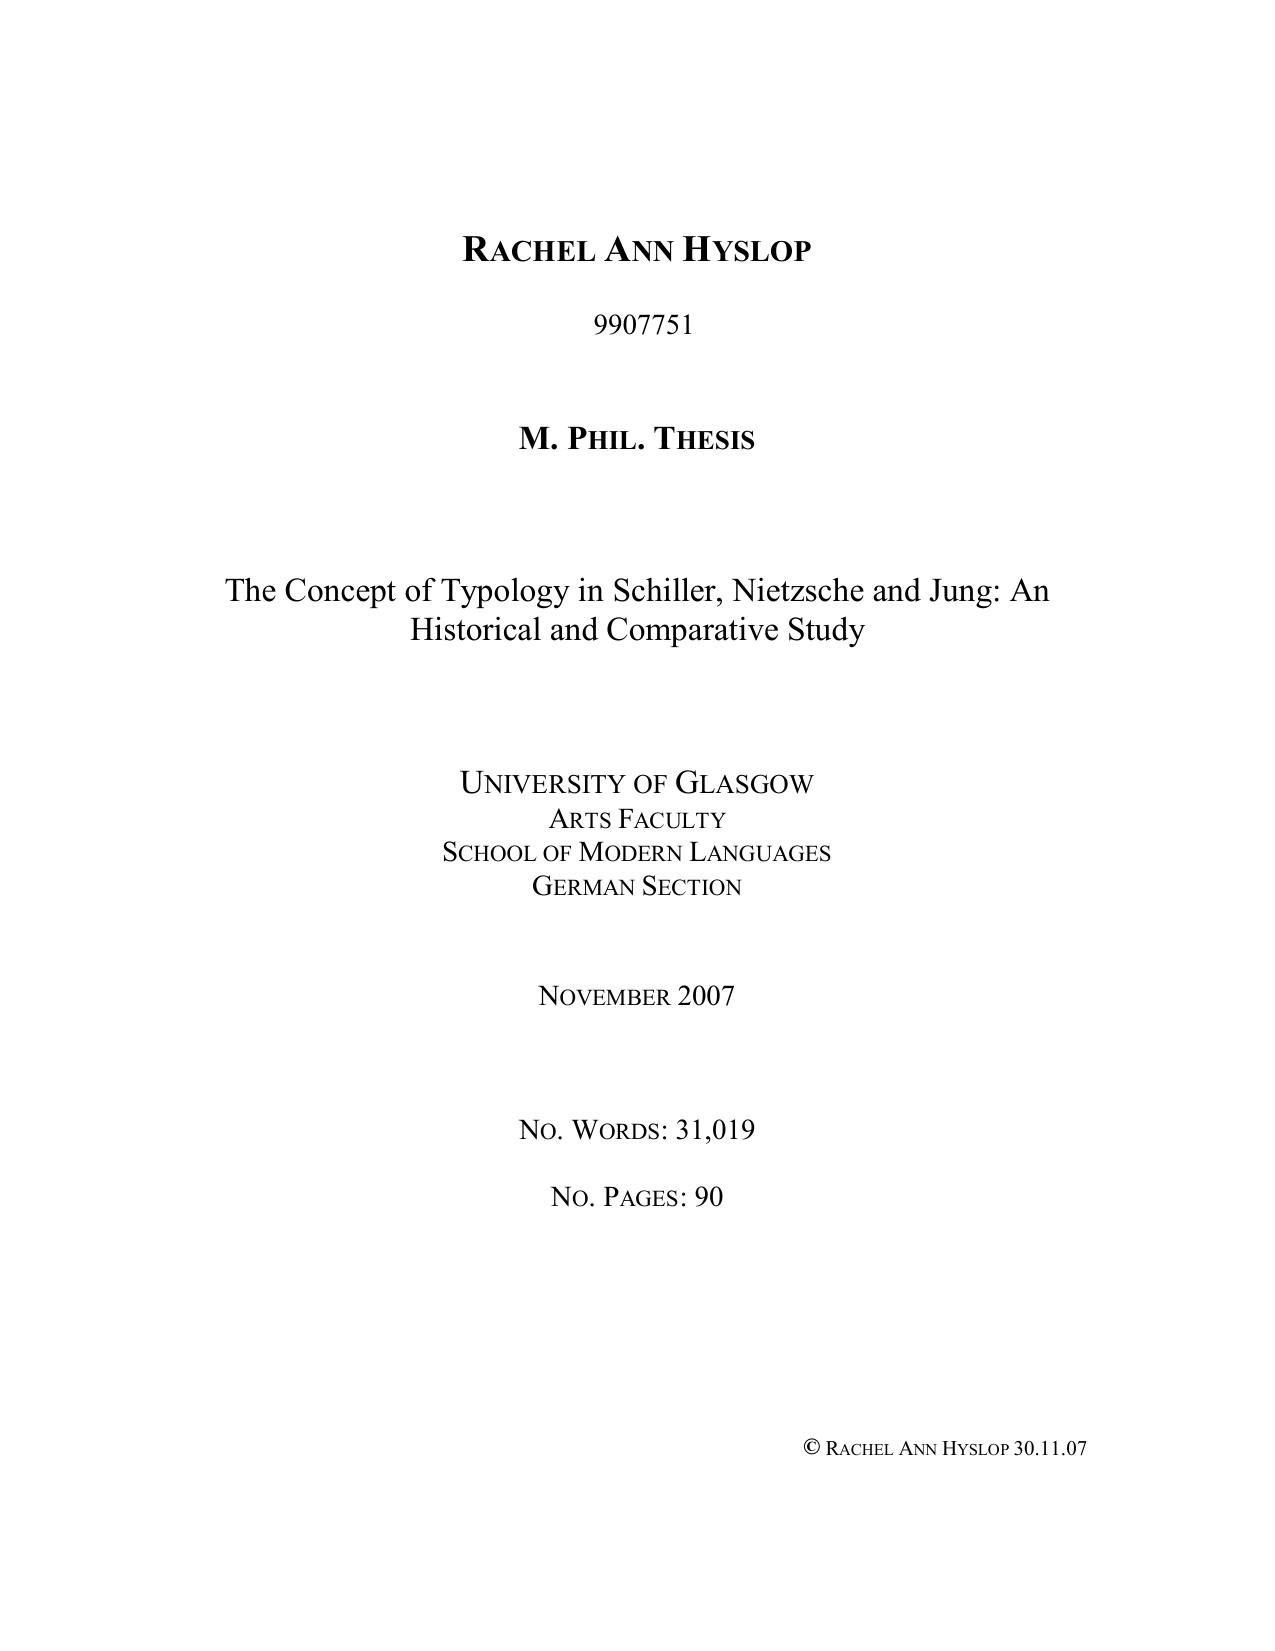 The Concept of Typology in Schiller, Nietzsche and Jung: An Historical and Comparative Study - Thesis